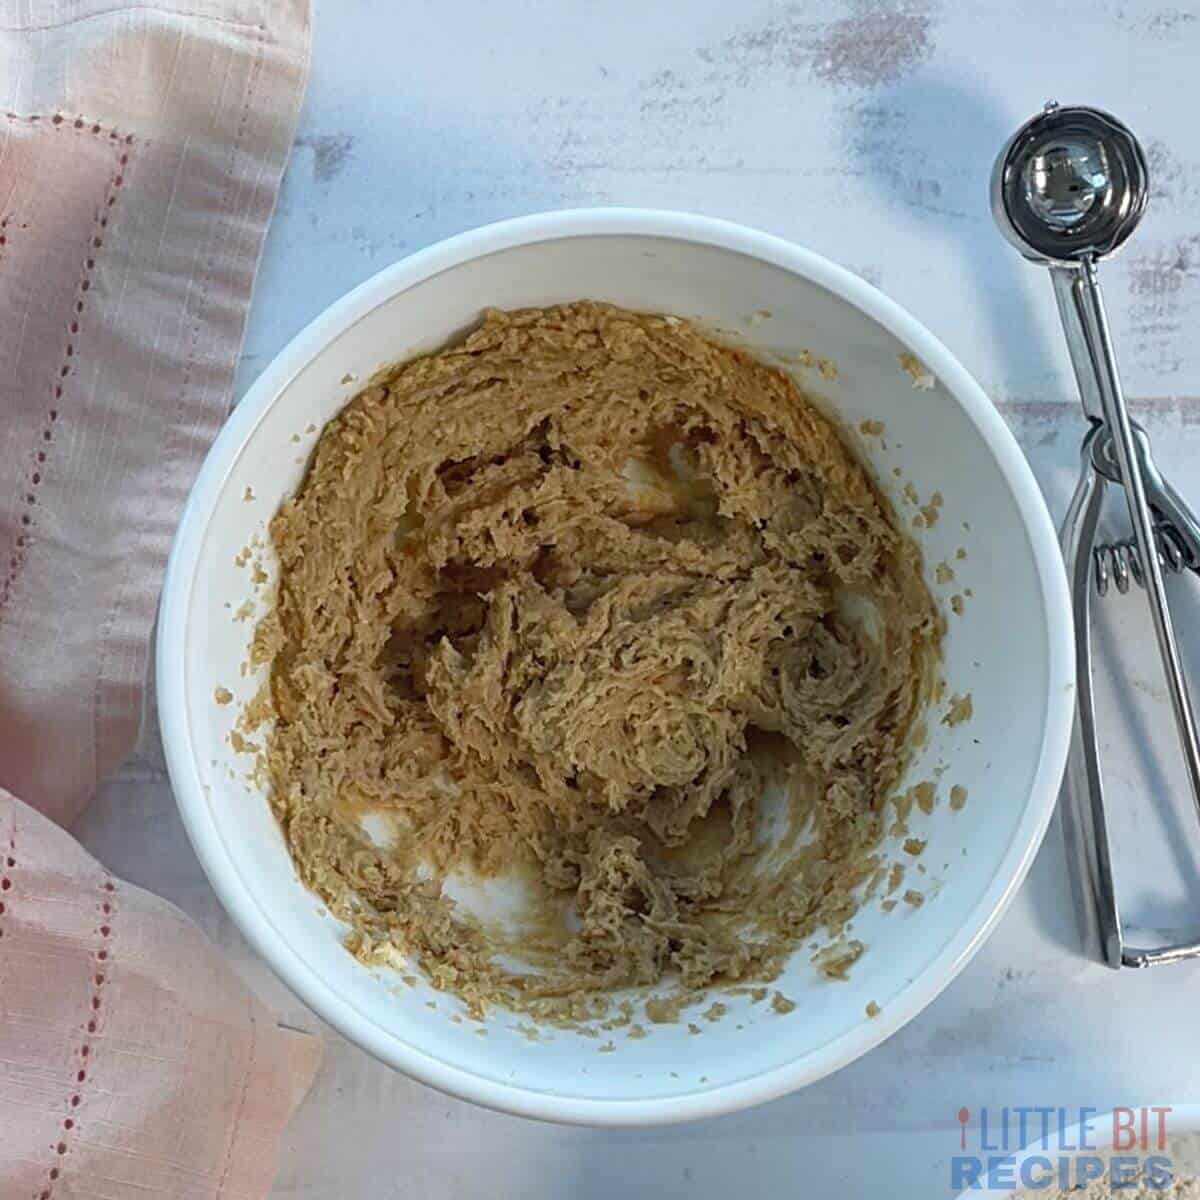 peanut butter mixture in bowl.